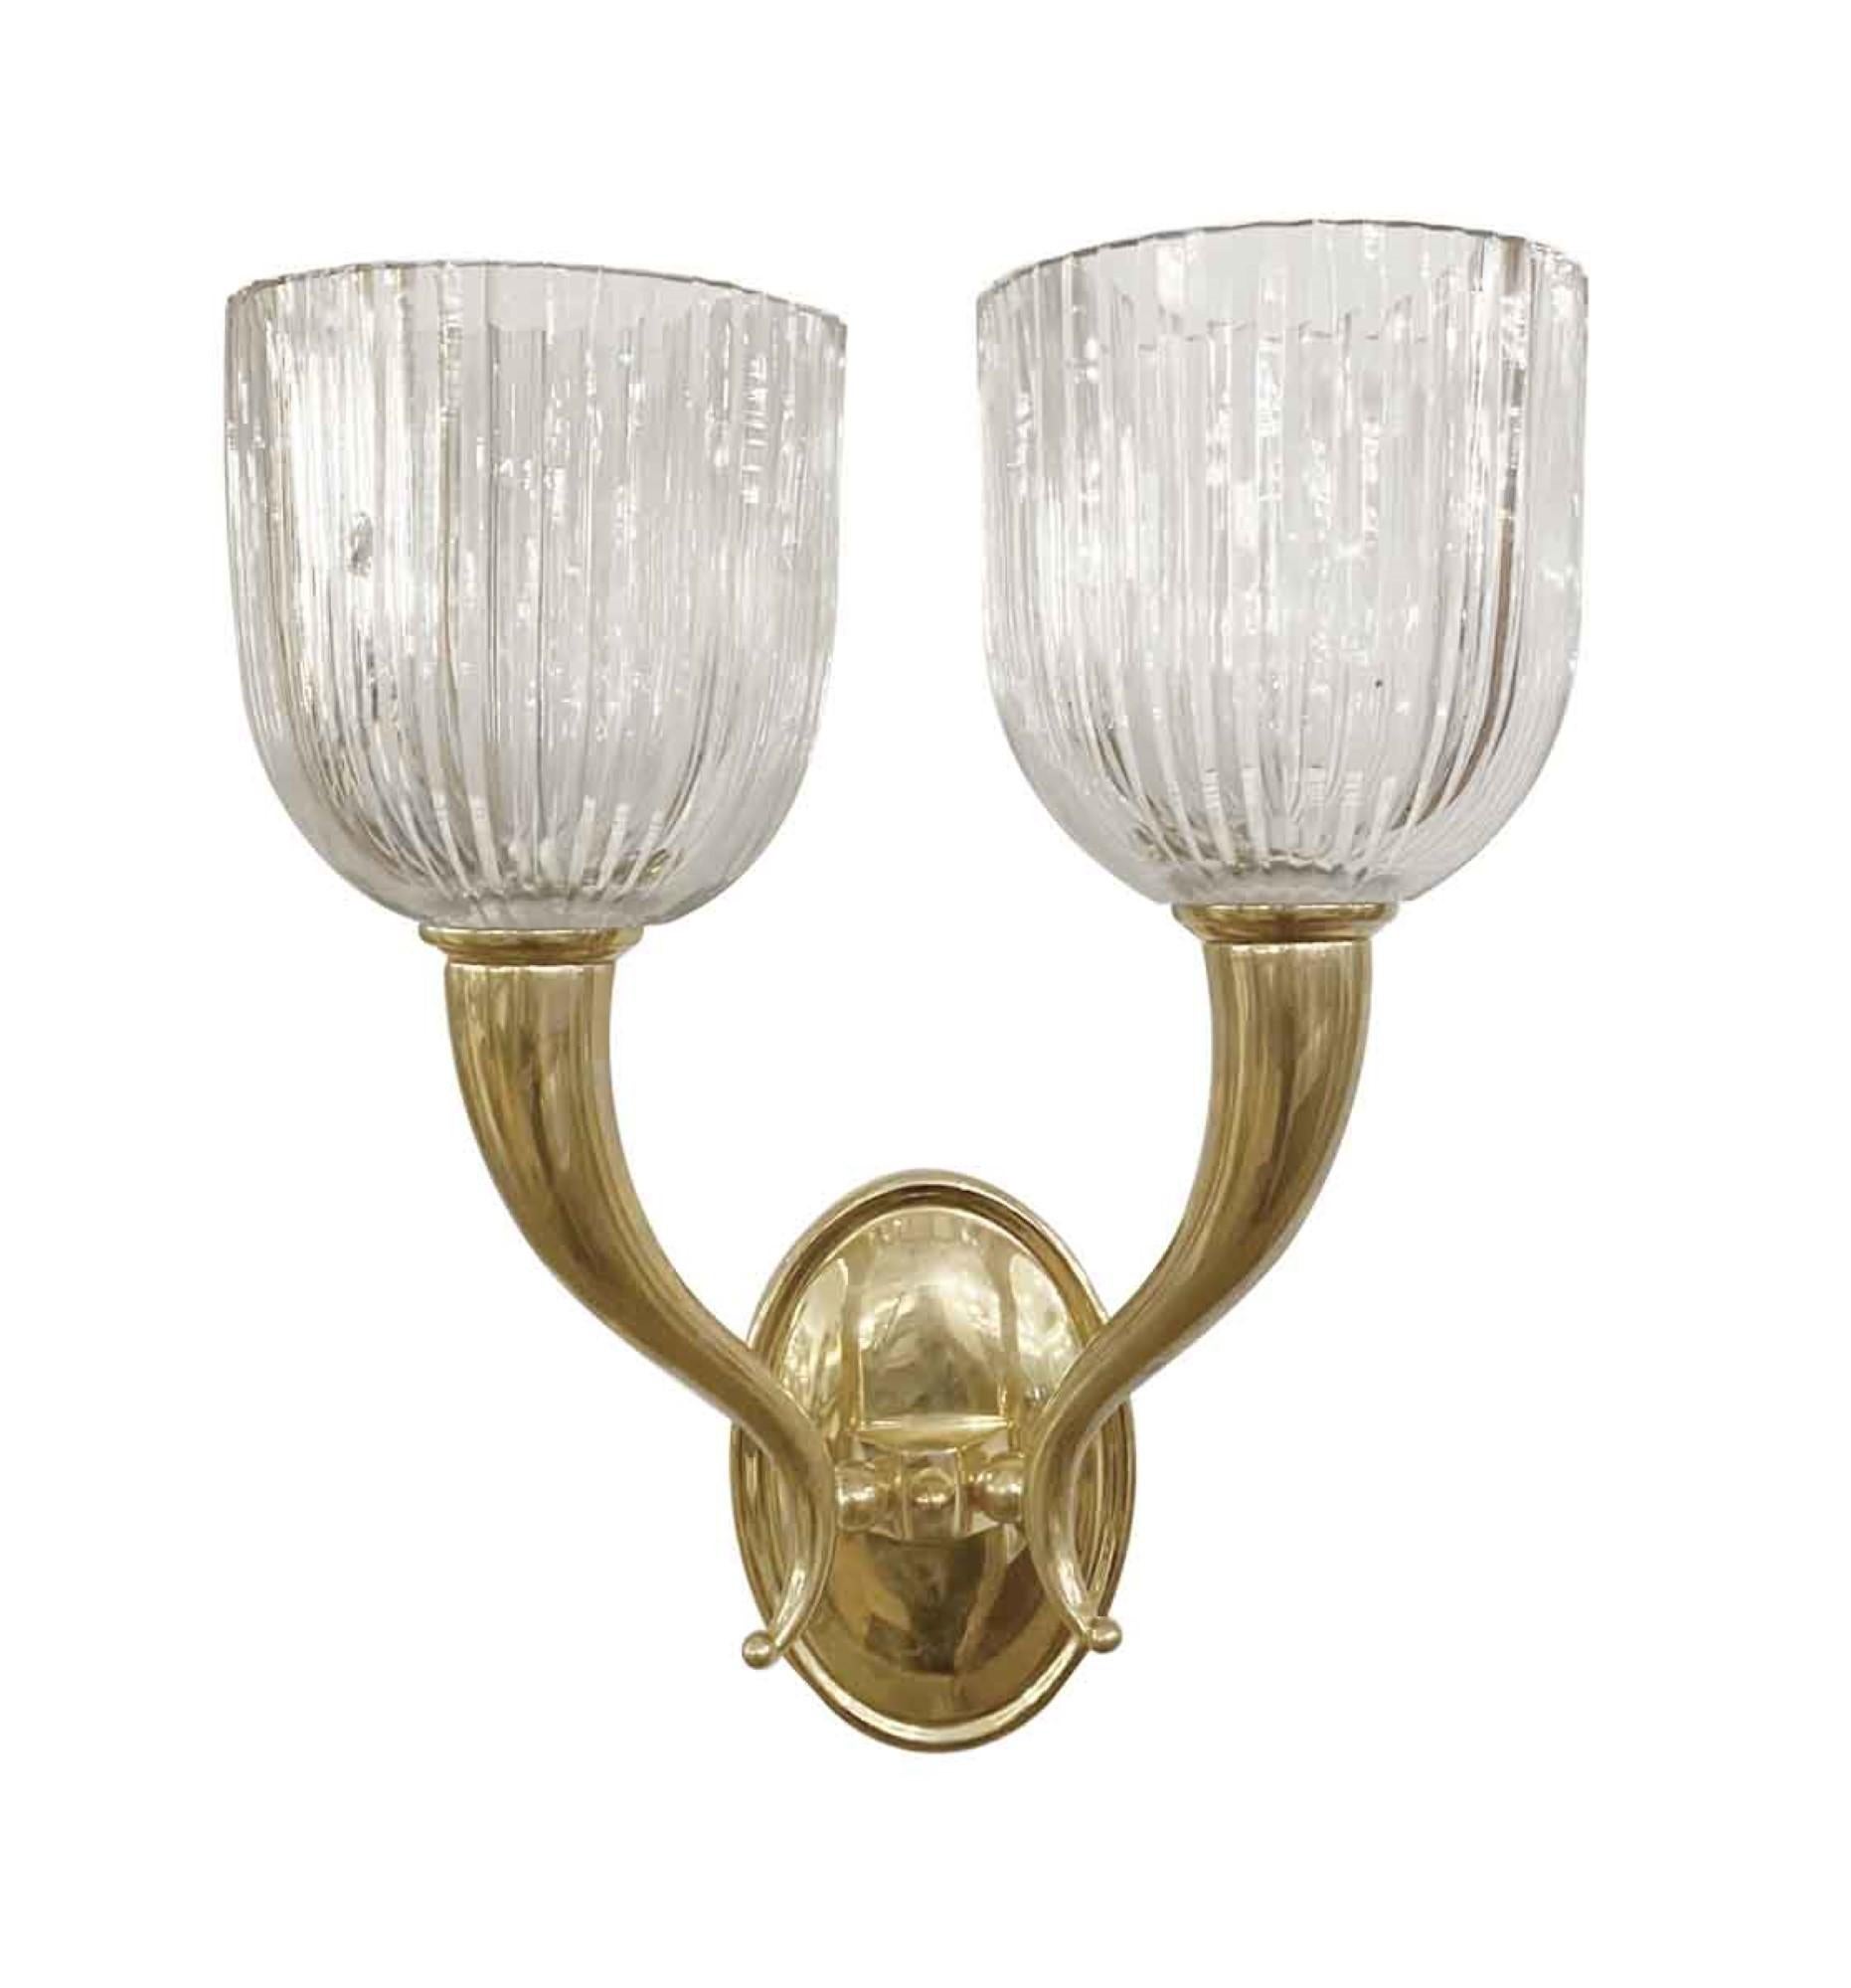 2000s brass sconces with heavy crystal fluted shades done in an Italian Modern style. Small quantity available at time of posting. Priced each pair. This can be seen at our 333 West 52nd St location in the Theater District West of Manhattan.